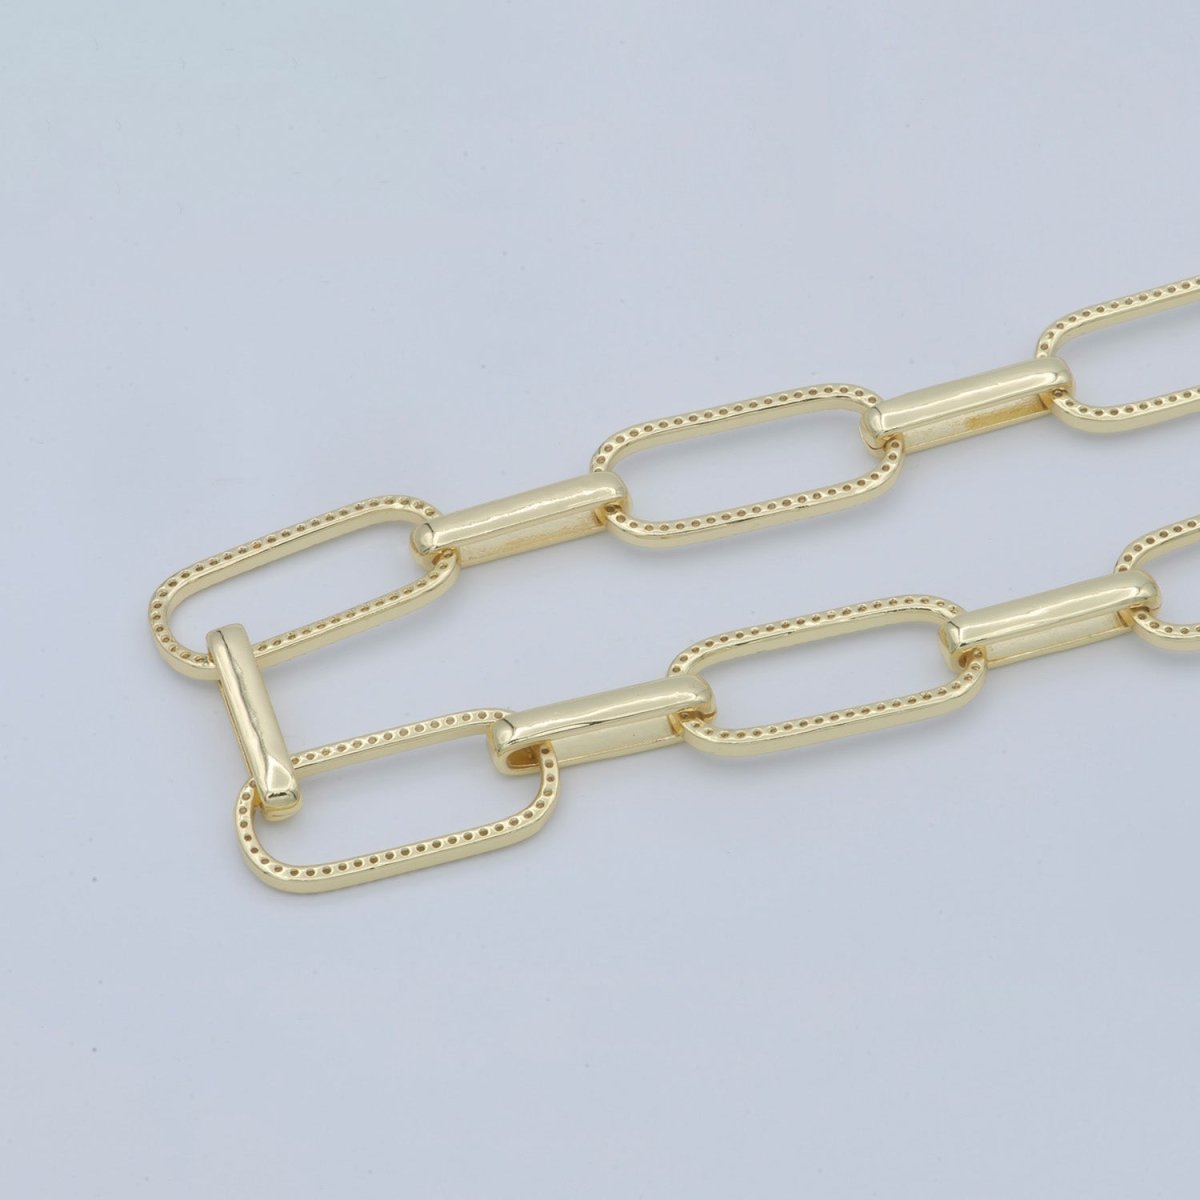 Bold Gold Micro Pave Paperclip Chain by Meter, CZ Specialty Link Chain Necklace by Meter, For Fashion Jewelry Making, 24K Gold Filled UNIQUE PAPER CLIP For Necklace Bracelet Anklet Supply Component | ROLL-489(O-077) Clearance Pricing - DLUXCA